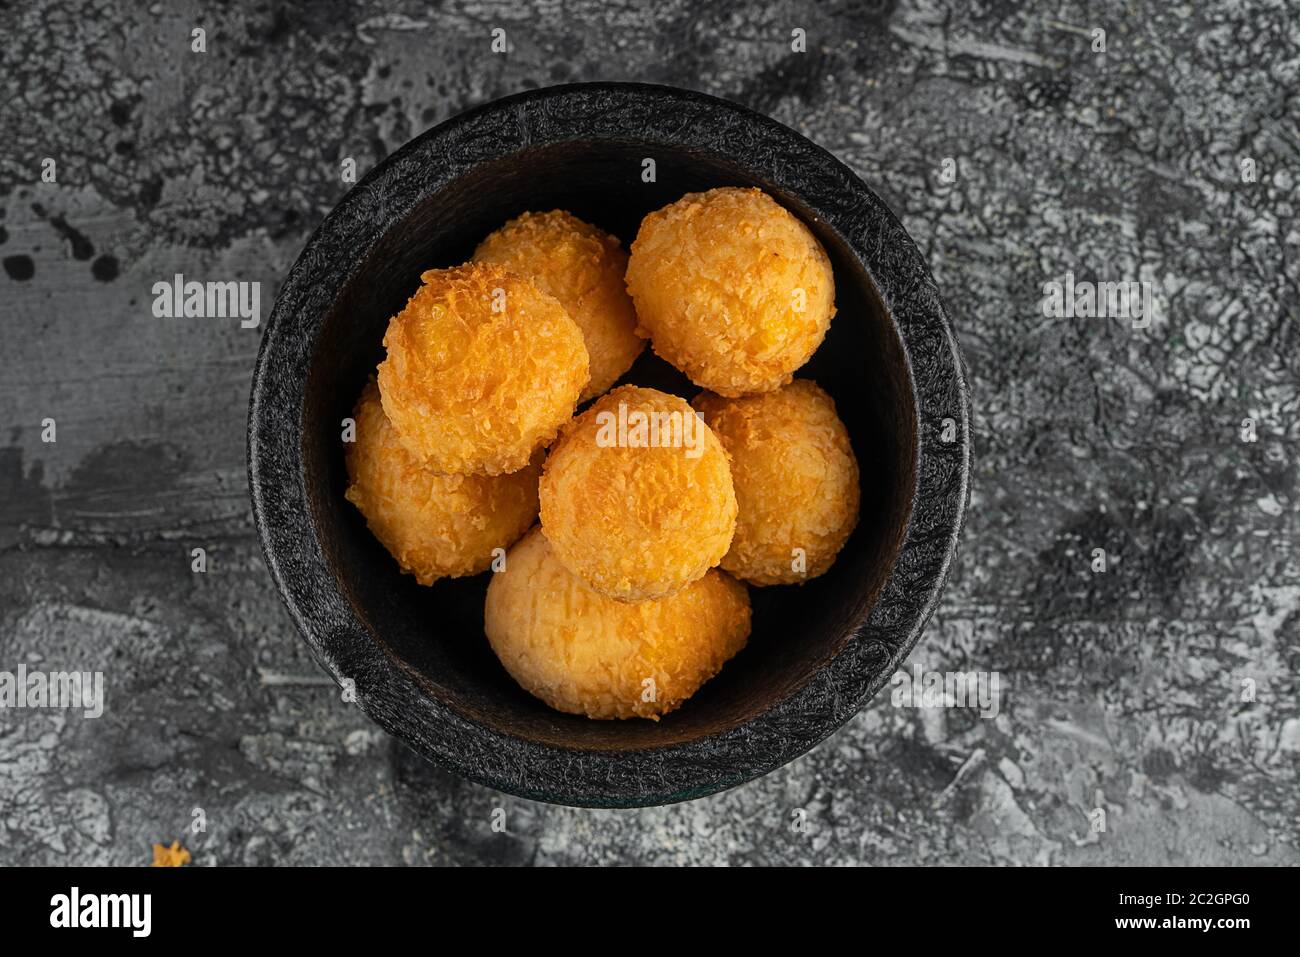 Potato croquettes - mashed potatoes balls breaded and deep fried, served with different sauce. Stock Photo